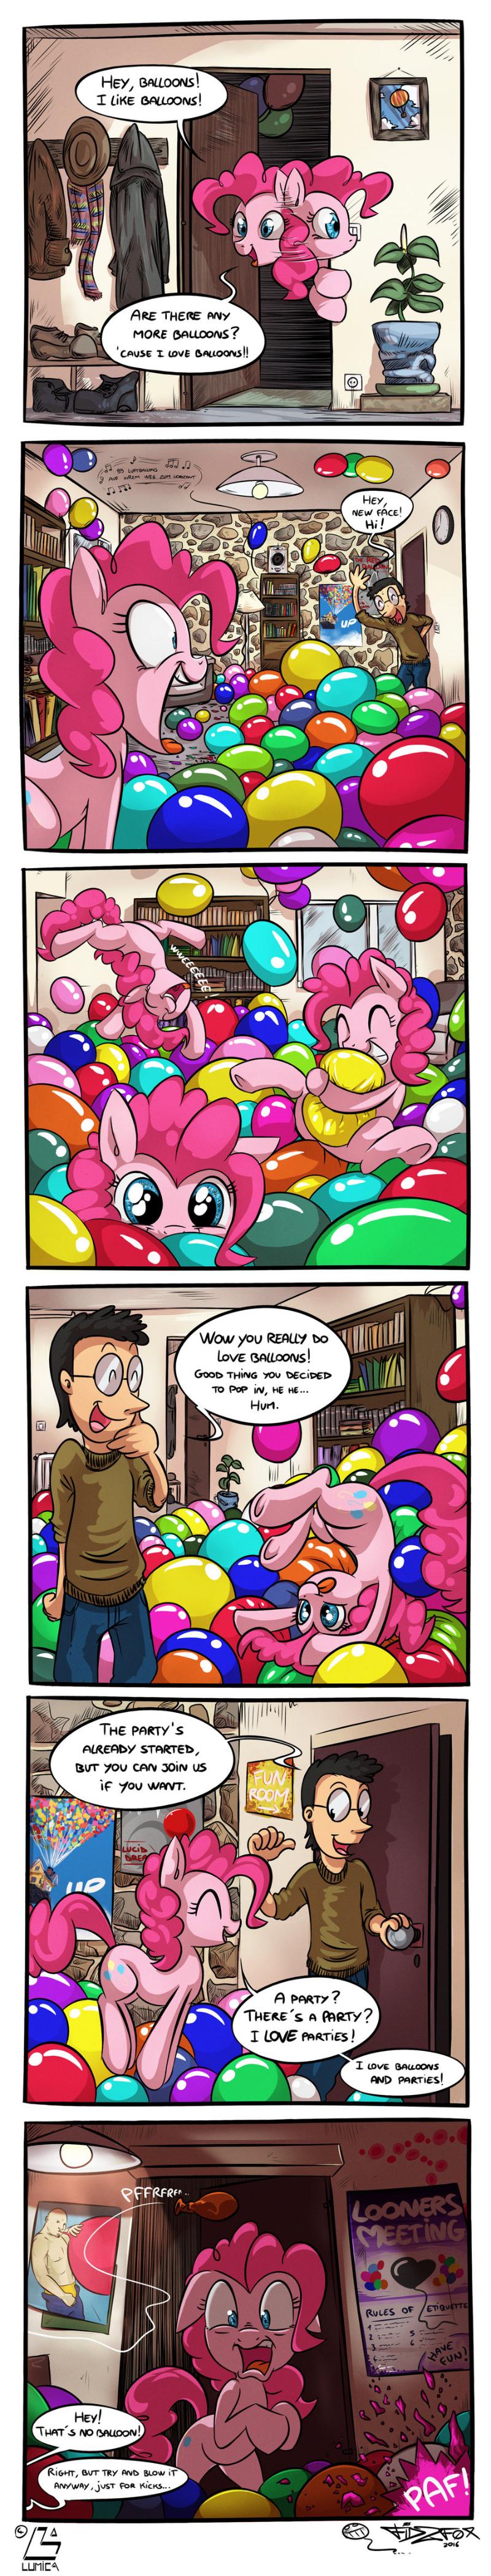 Page 4 - Going ballooney